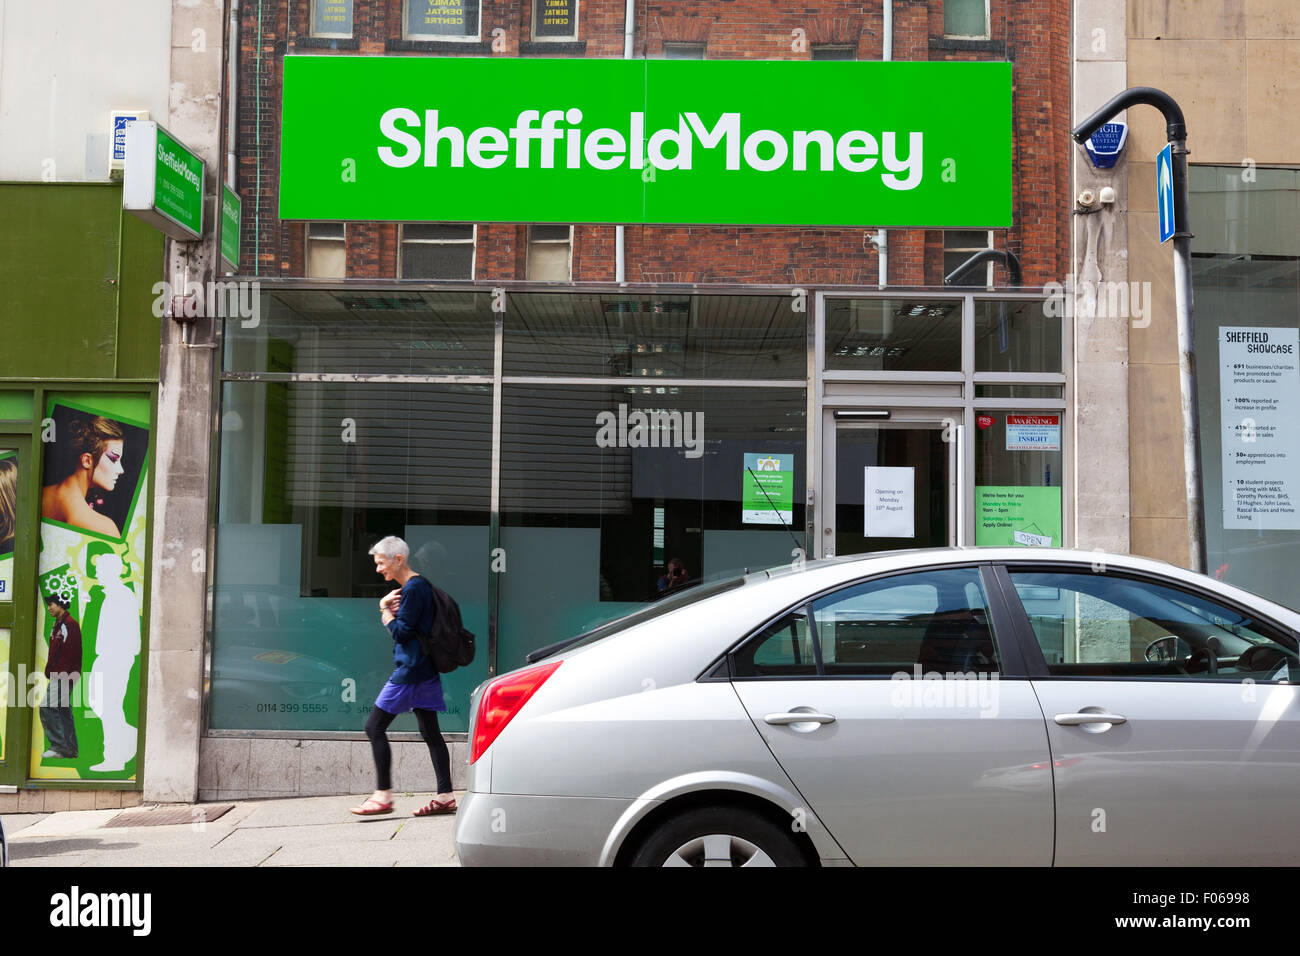 Cambridge Street, Sheffield, South Yorkshire, UK. 8th August 2015,  Sheffield Money, which is supported by Sheffield City Council and regulated by the Financial Conduct Authority, is set to open for business on Monday 10th August. With a range of loans on offer, it aims to assist some of the city's poorest local residents by providing an alternative to high interest rates offered by payday loan organisations such as Wonga. Credit:  Mark Richardson/Alamy Live News Stock Photo